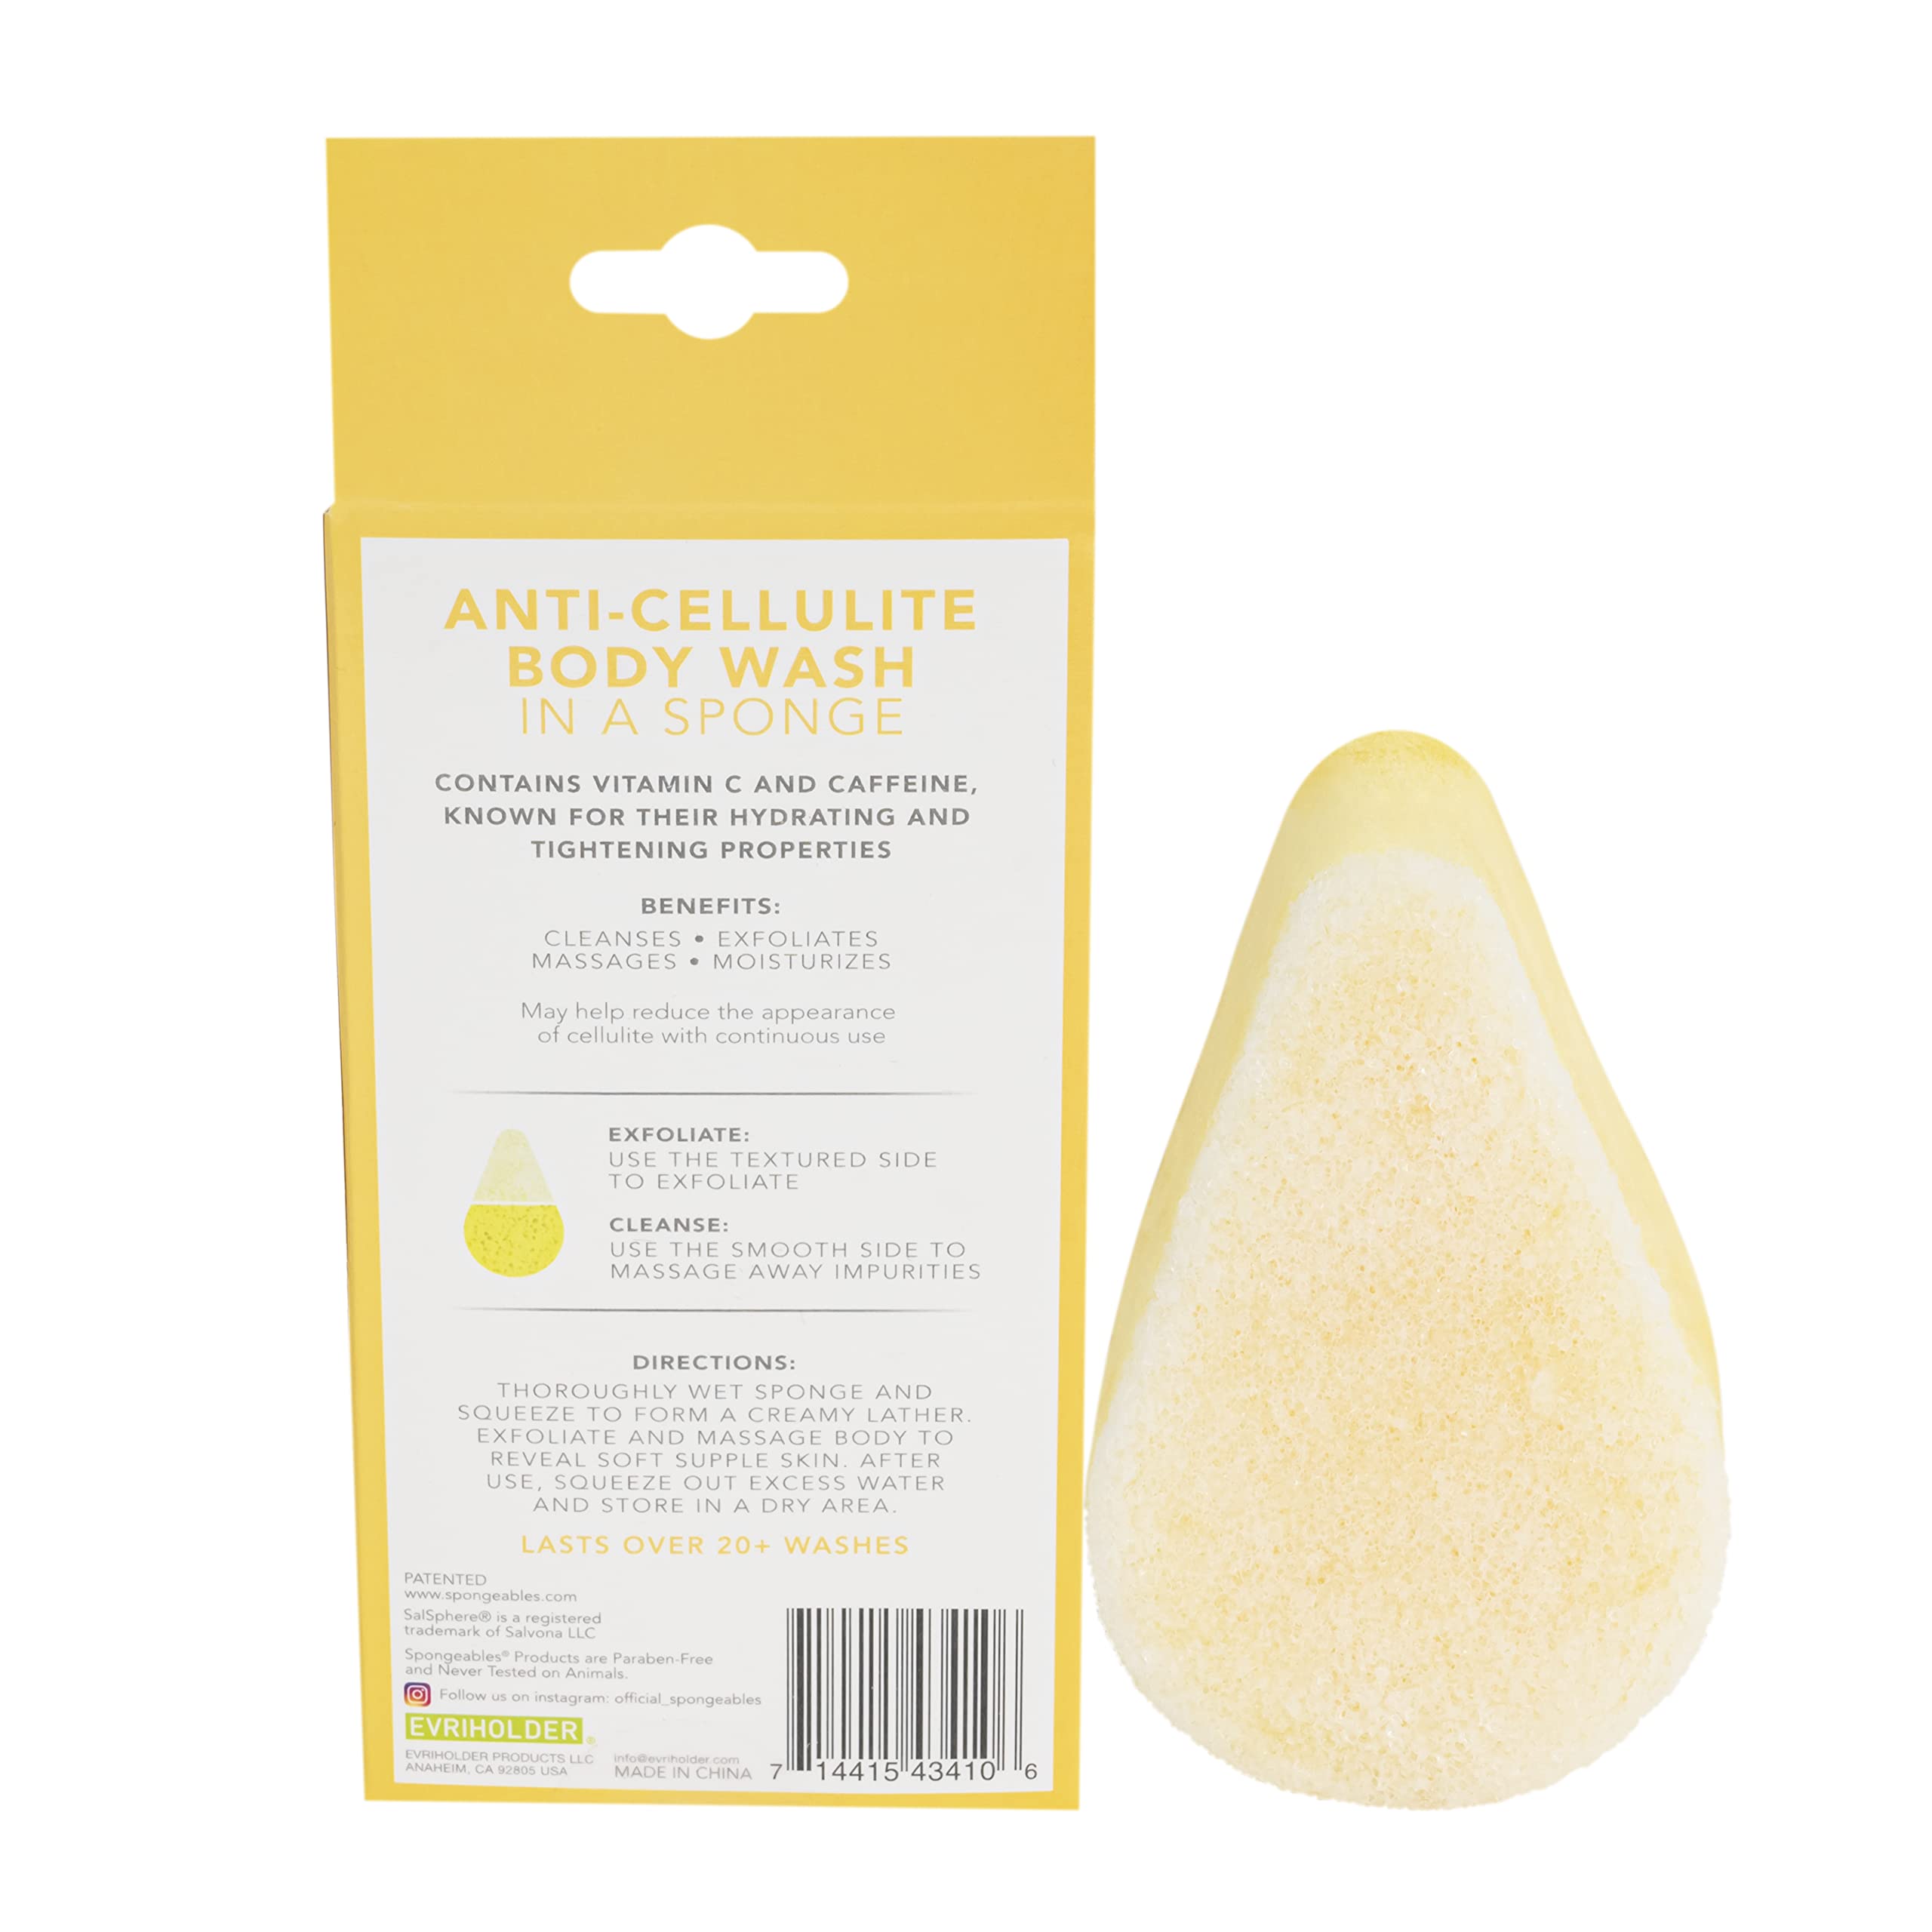 Spongeables AntiCellulite Body Wash in A Sponge with Vitamin C, Reduce The Appearance of Cellulite, Moisturizer and Exfoliator for The Body, 20+ Washes, Citrus, 3 Count